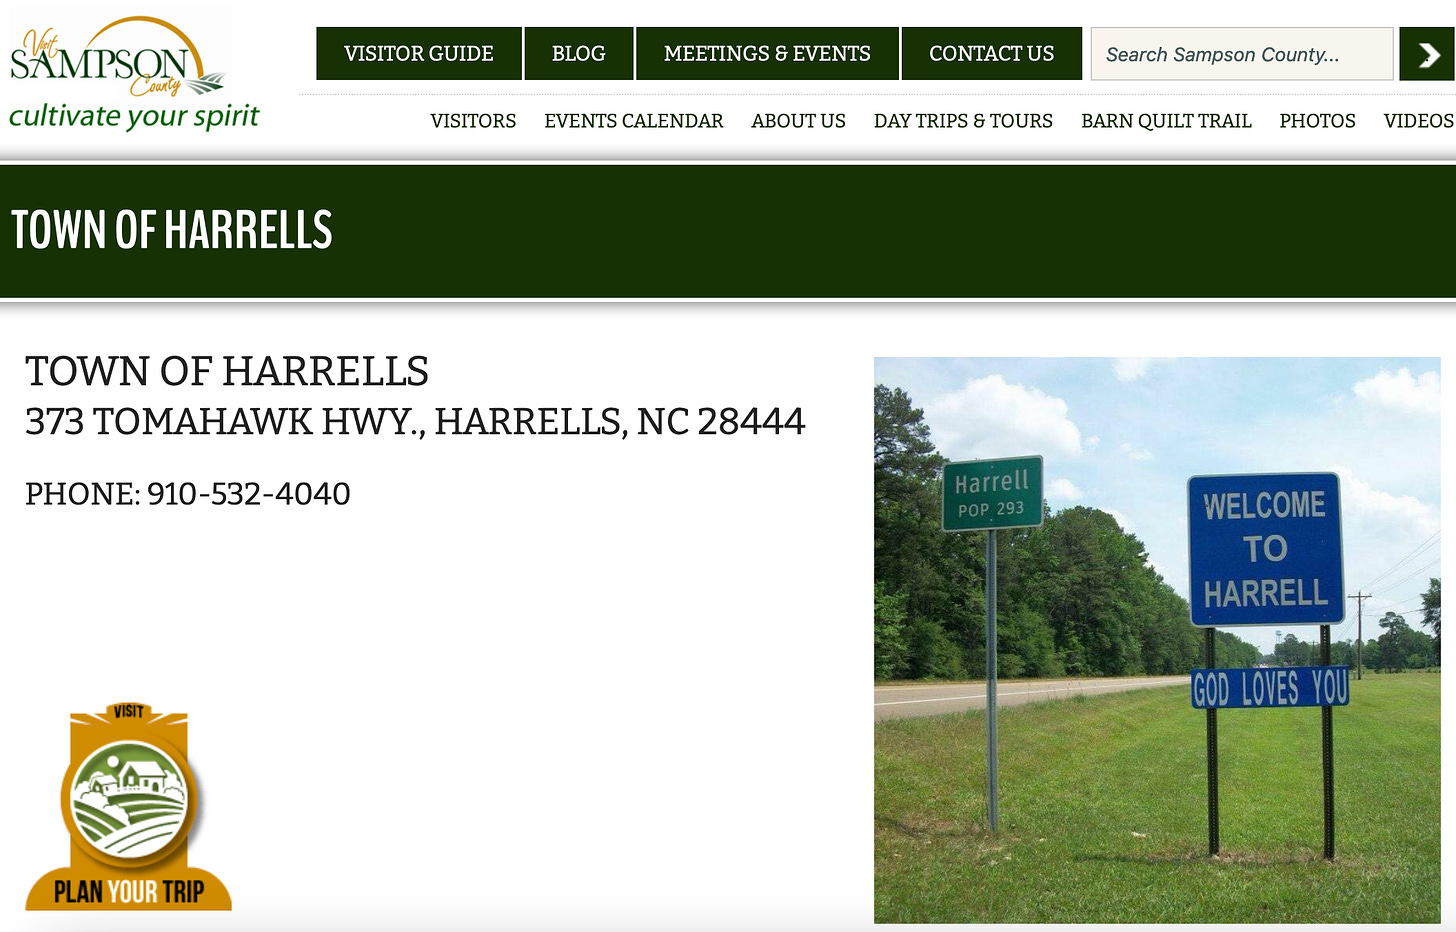 website for town of harrells that has a picture saying "welcome to harrell"